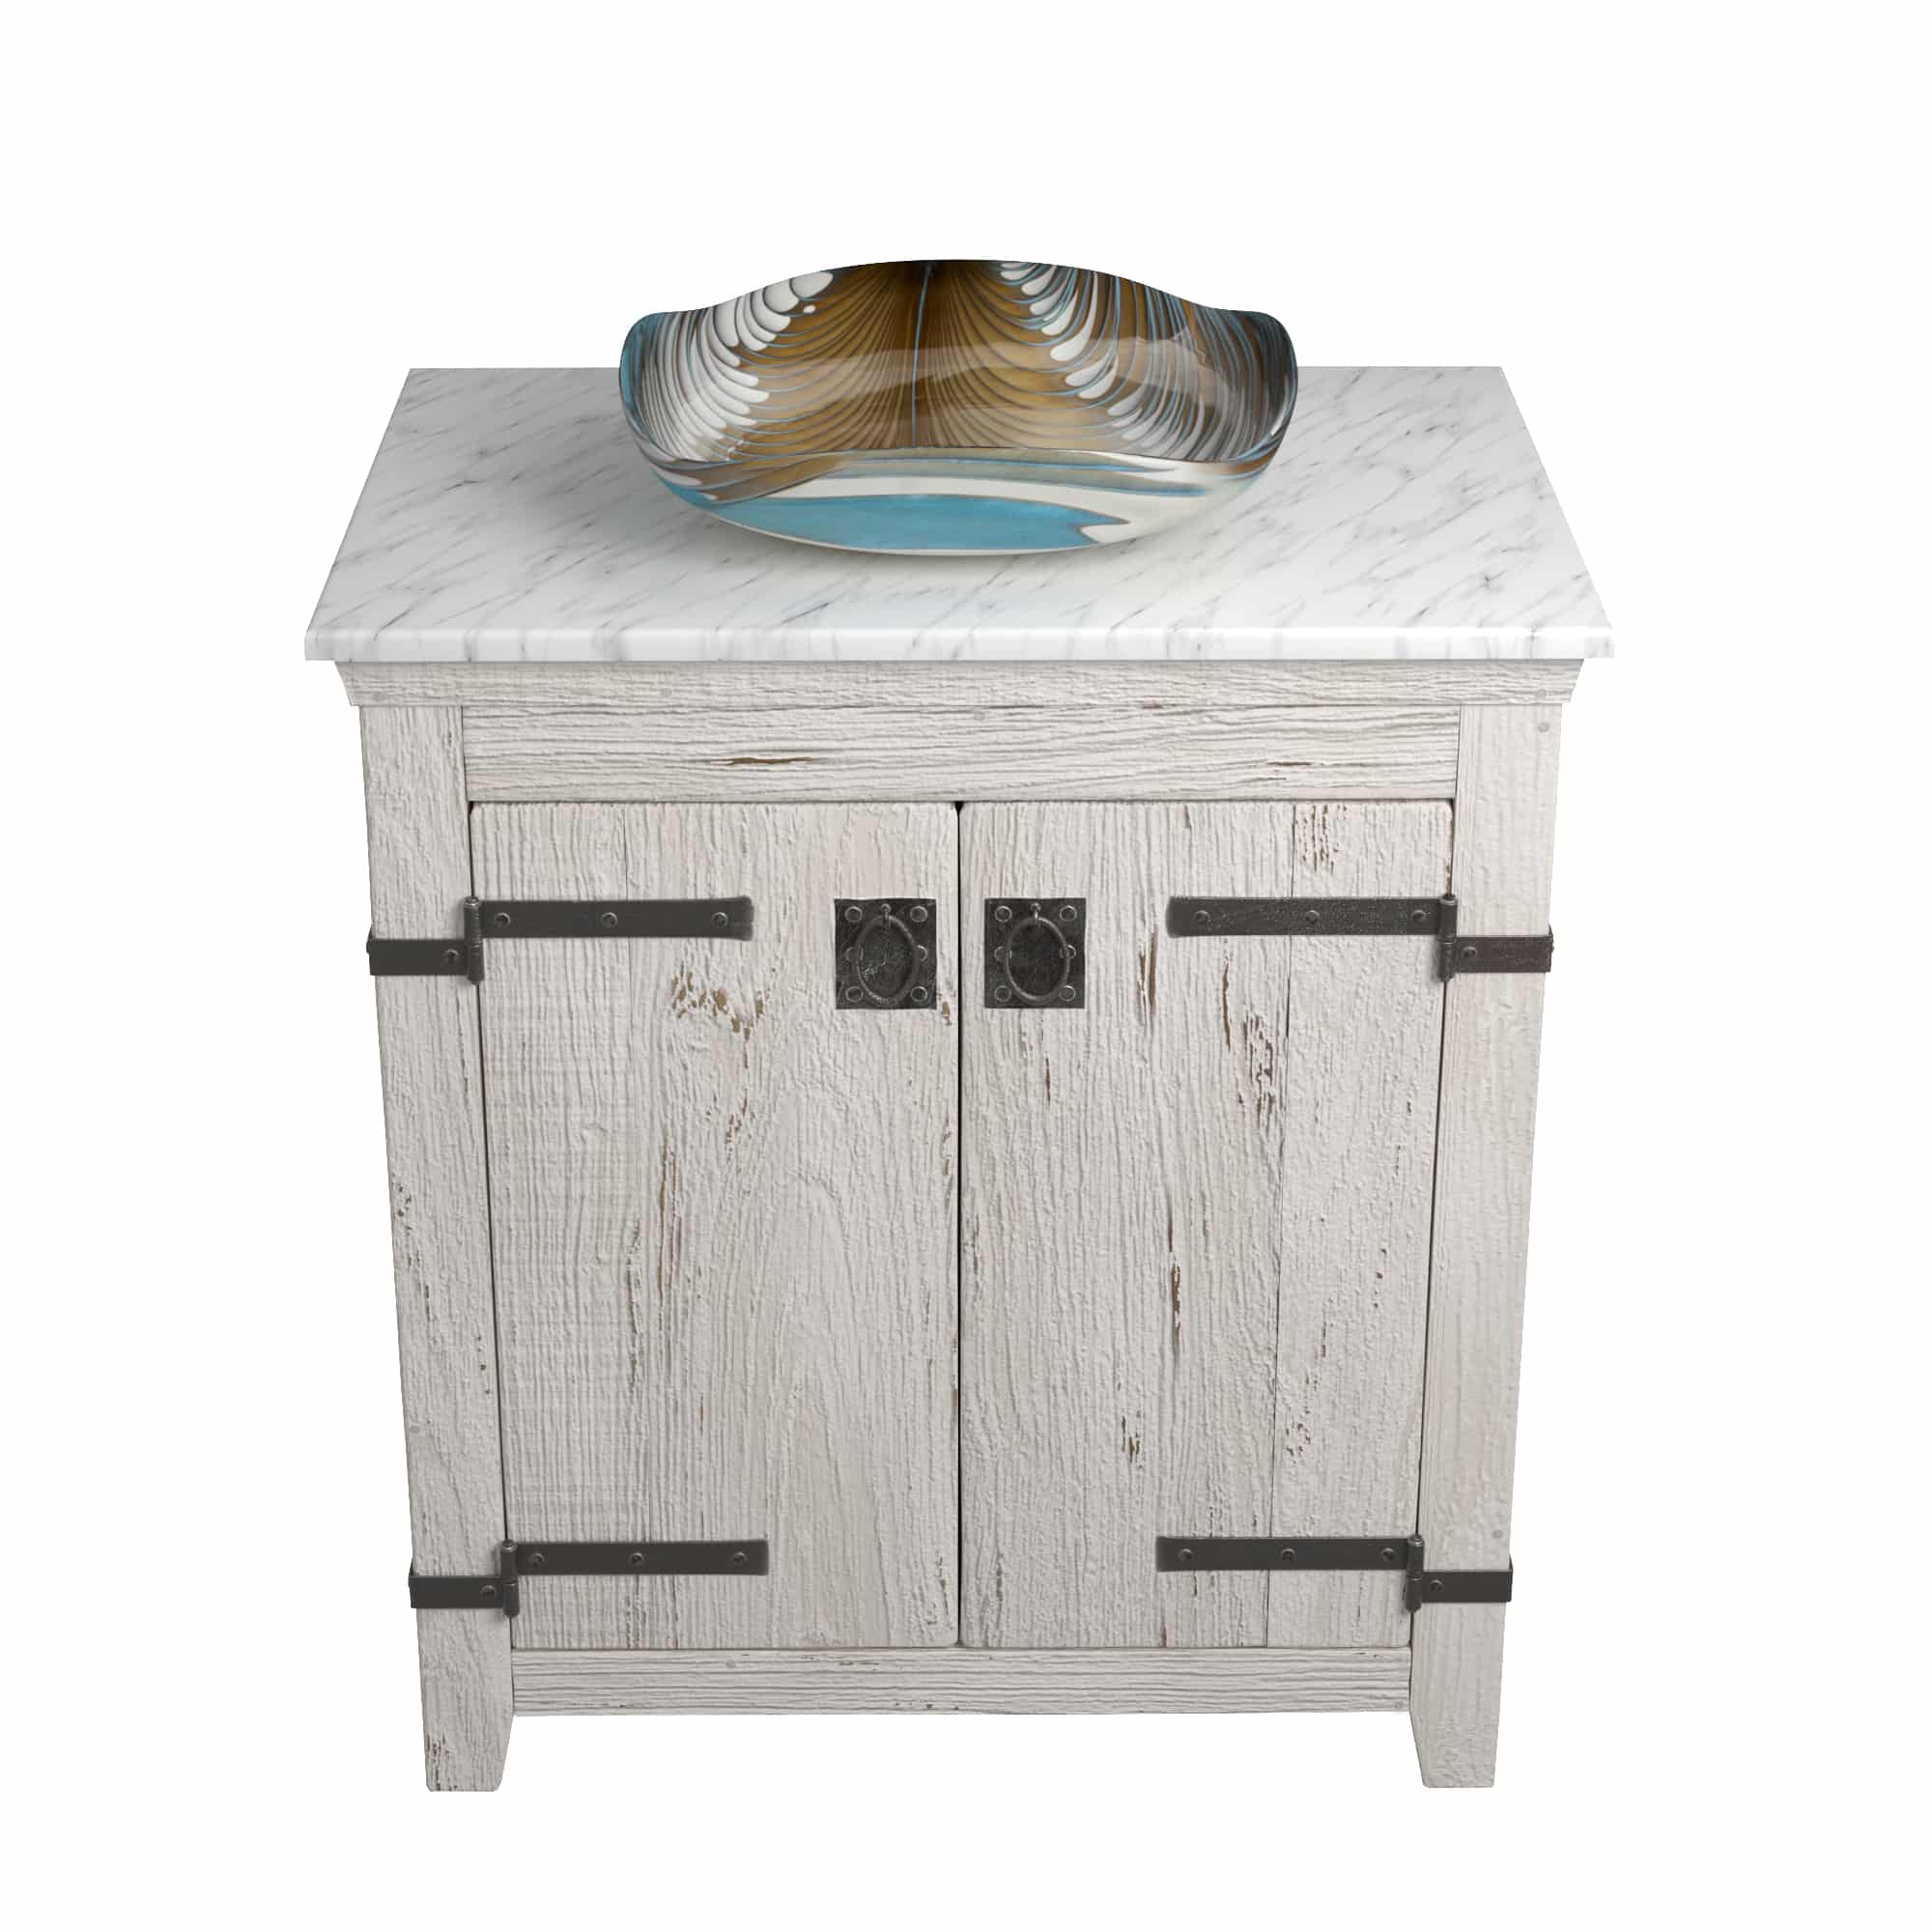 Native Trails 30" Americana Vanity in Whitewash with Carrara Marble Top and Lido in Shoreline, Single Faucet Hole, BND30-VB-CT-MG-025